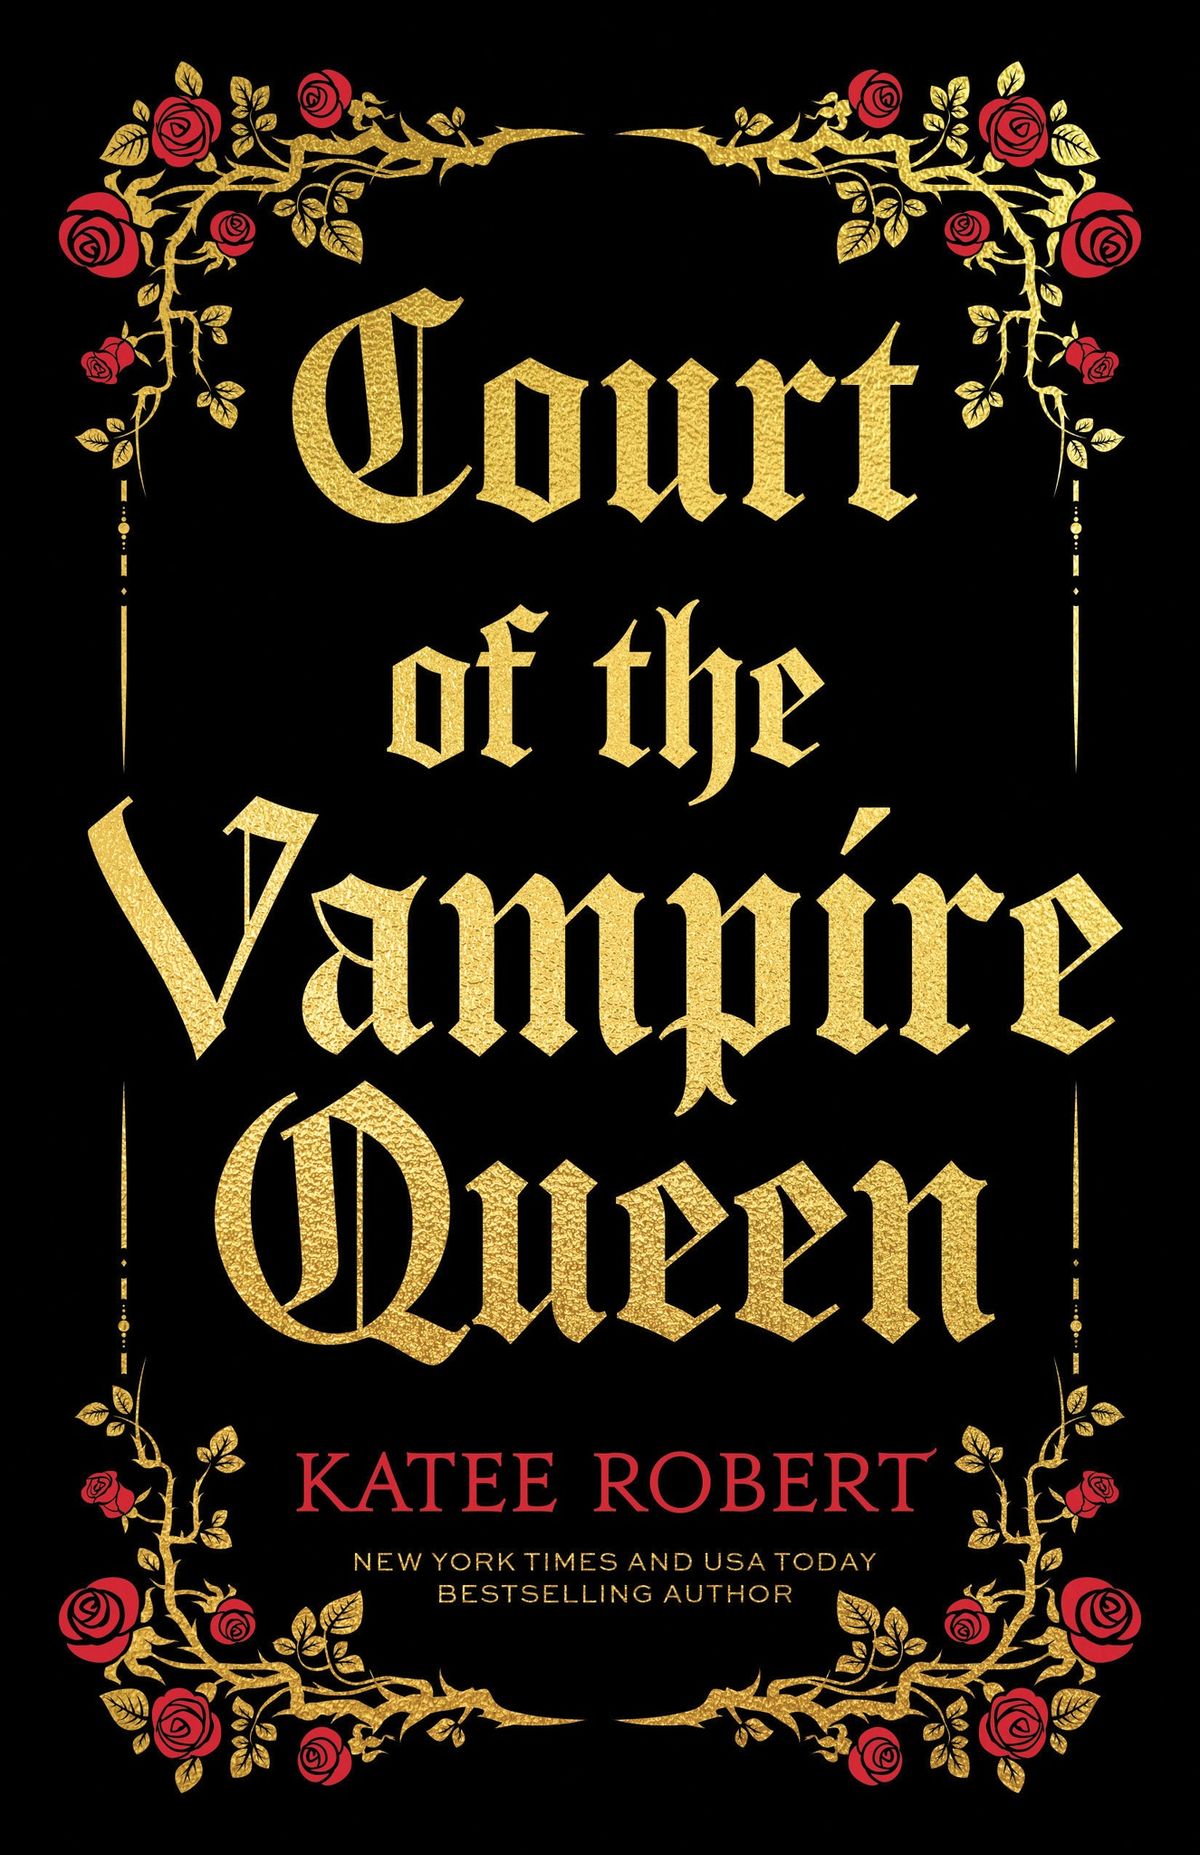 Enchanted Hearts and Ales Book Club - Court of the Vampire Queen